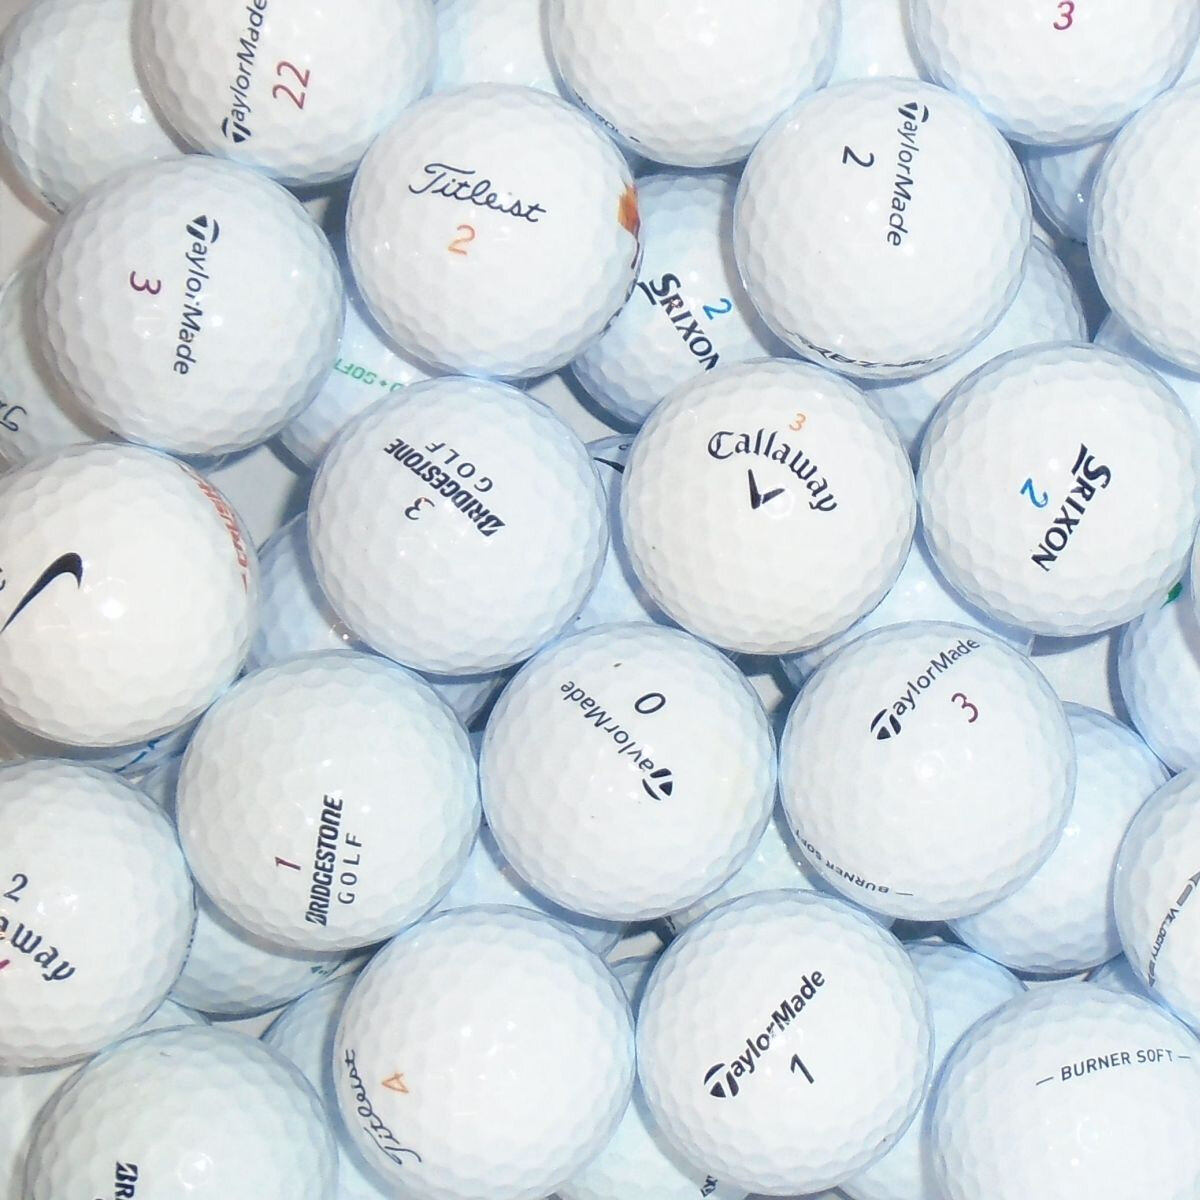 NEW GOLFERS: What golf ball should you buy?